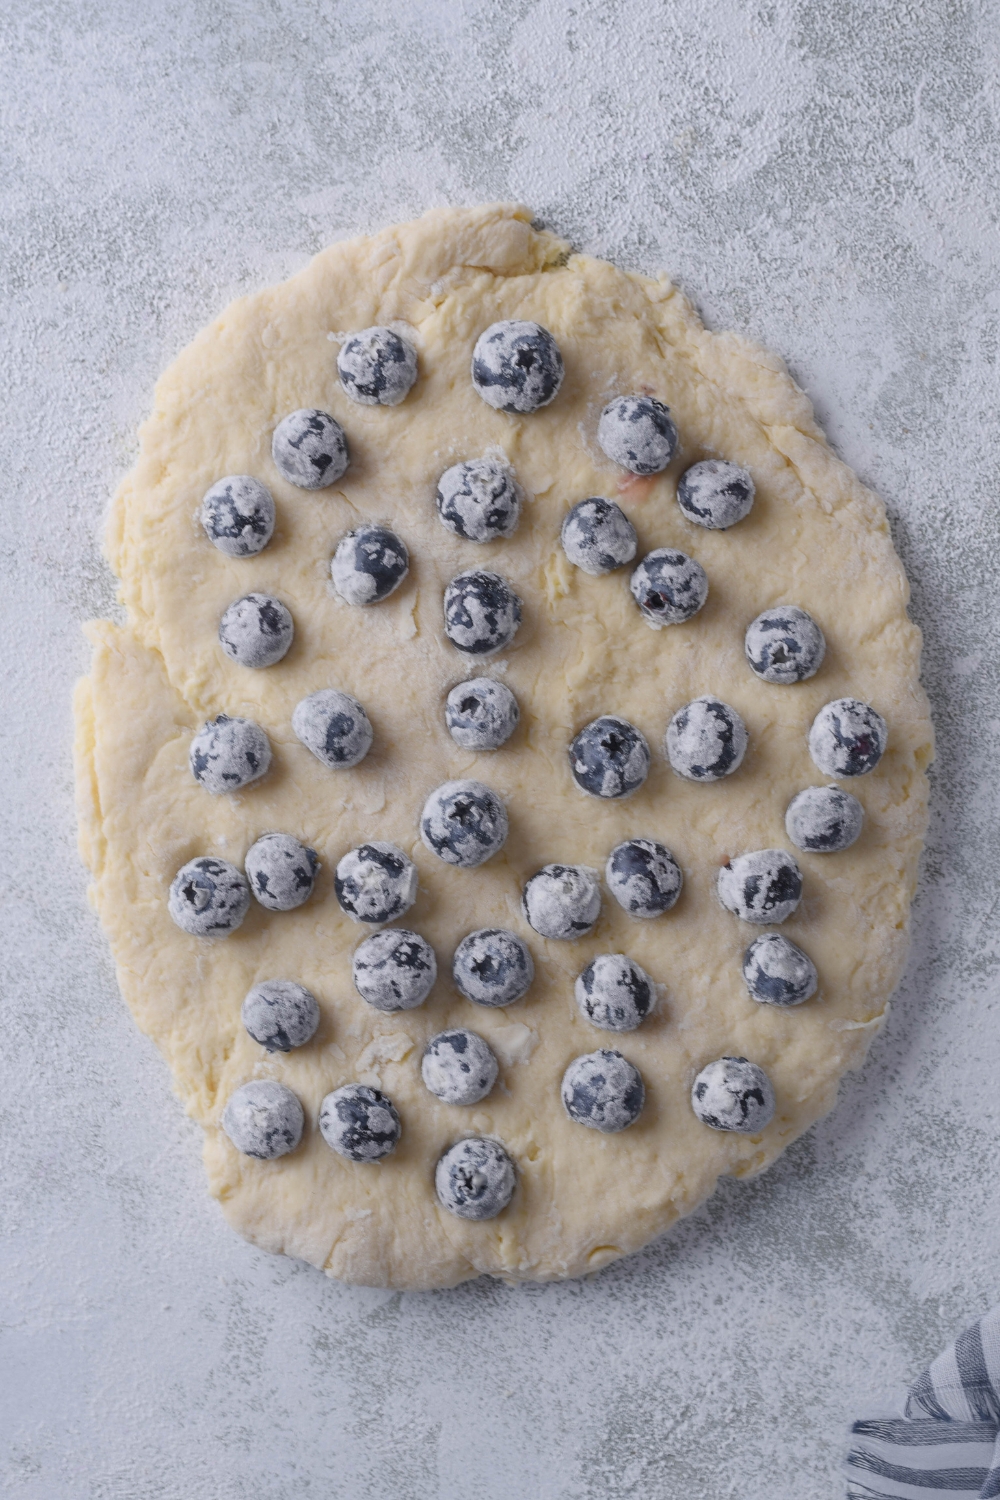 An overhead view of biscuit dough, fresh blueberries have just been added in one layer on it.